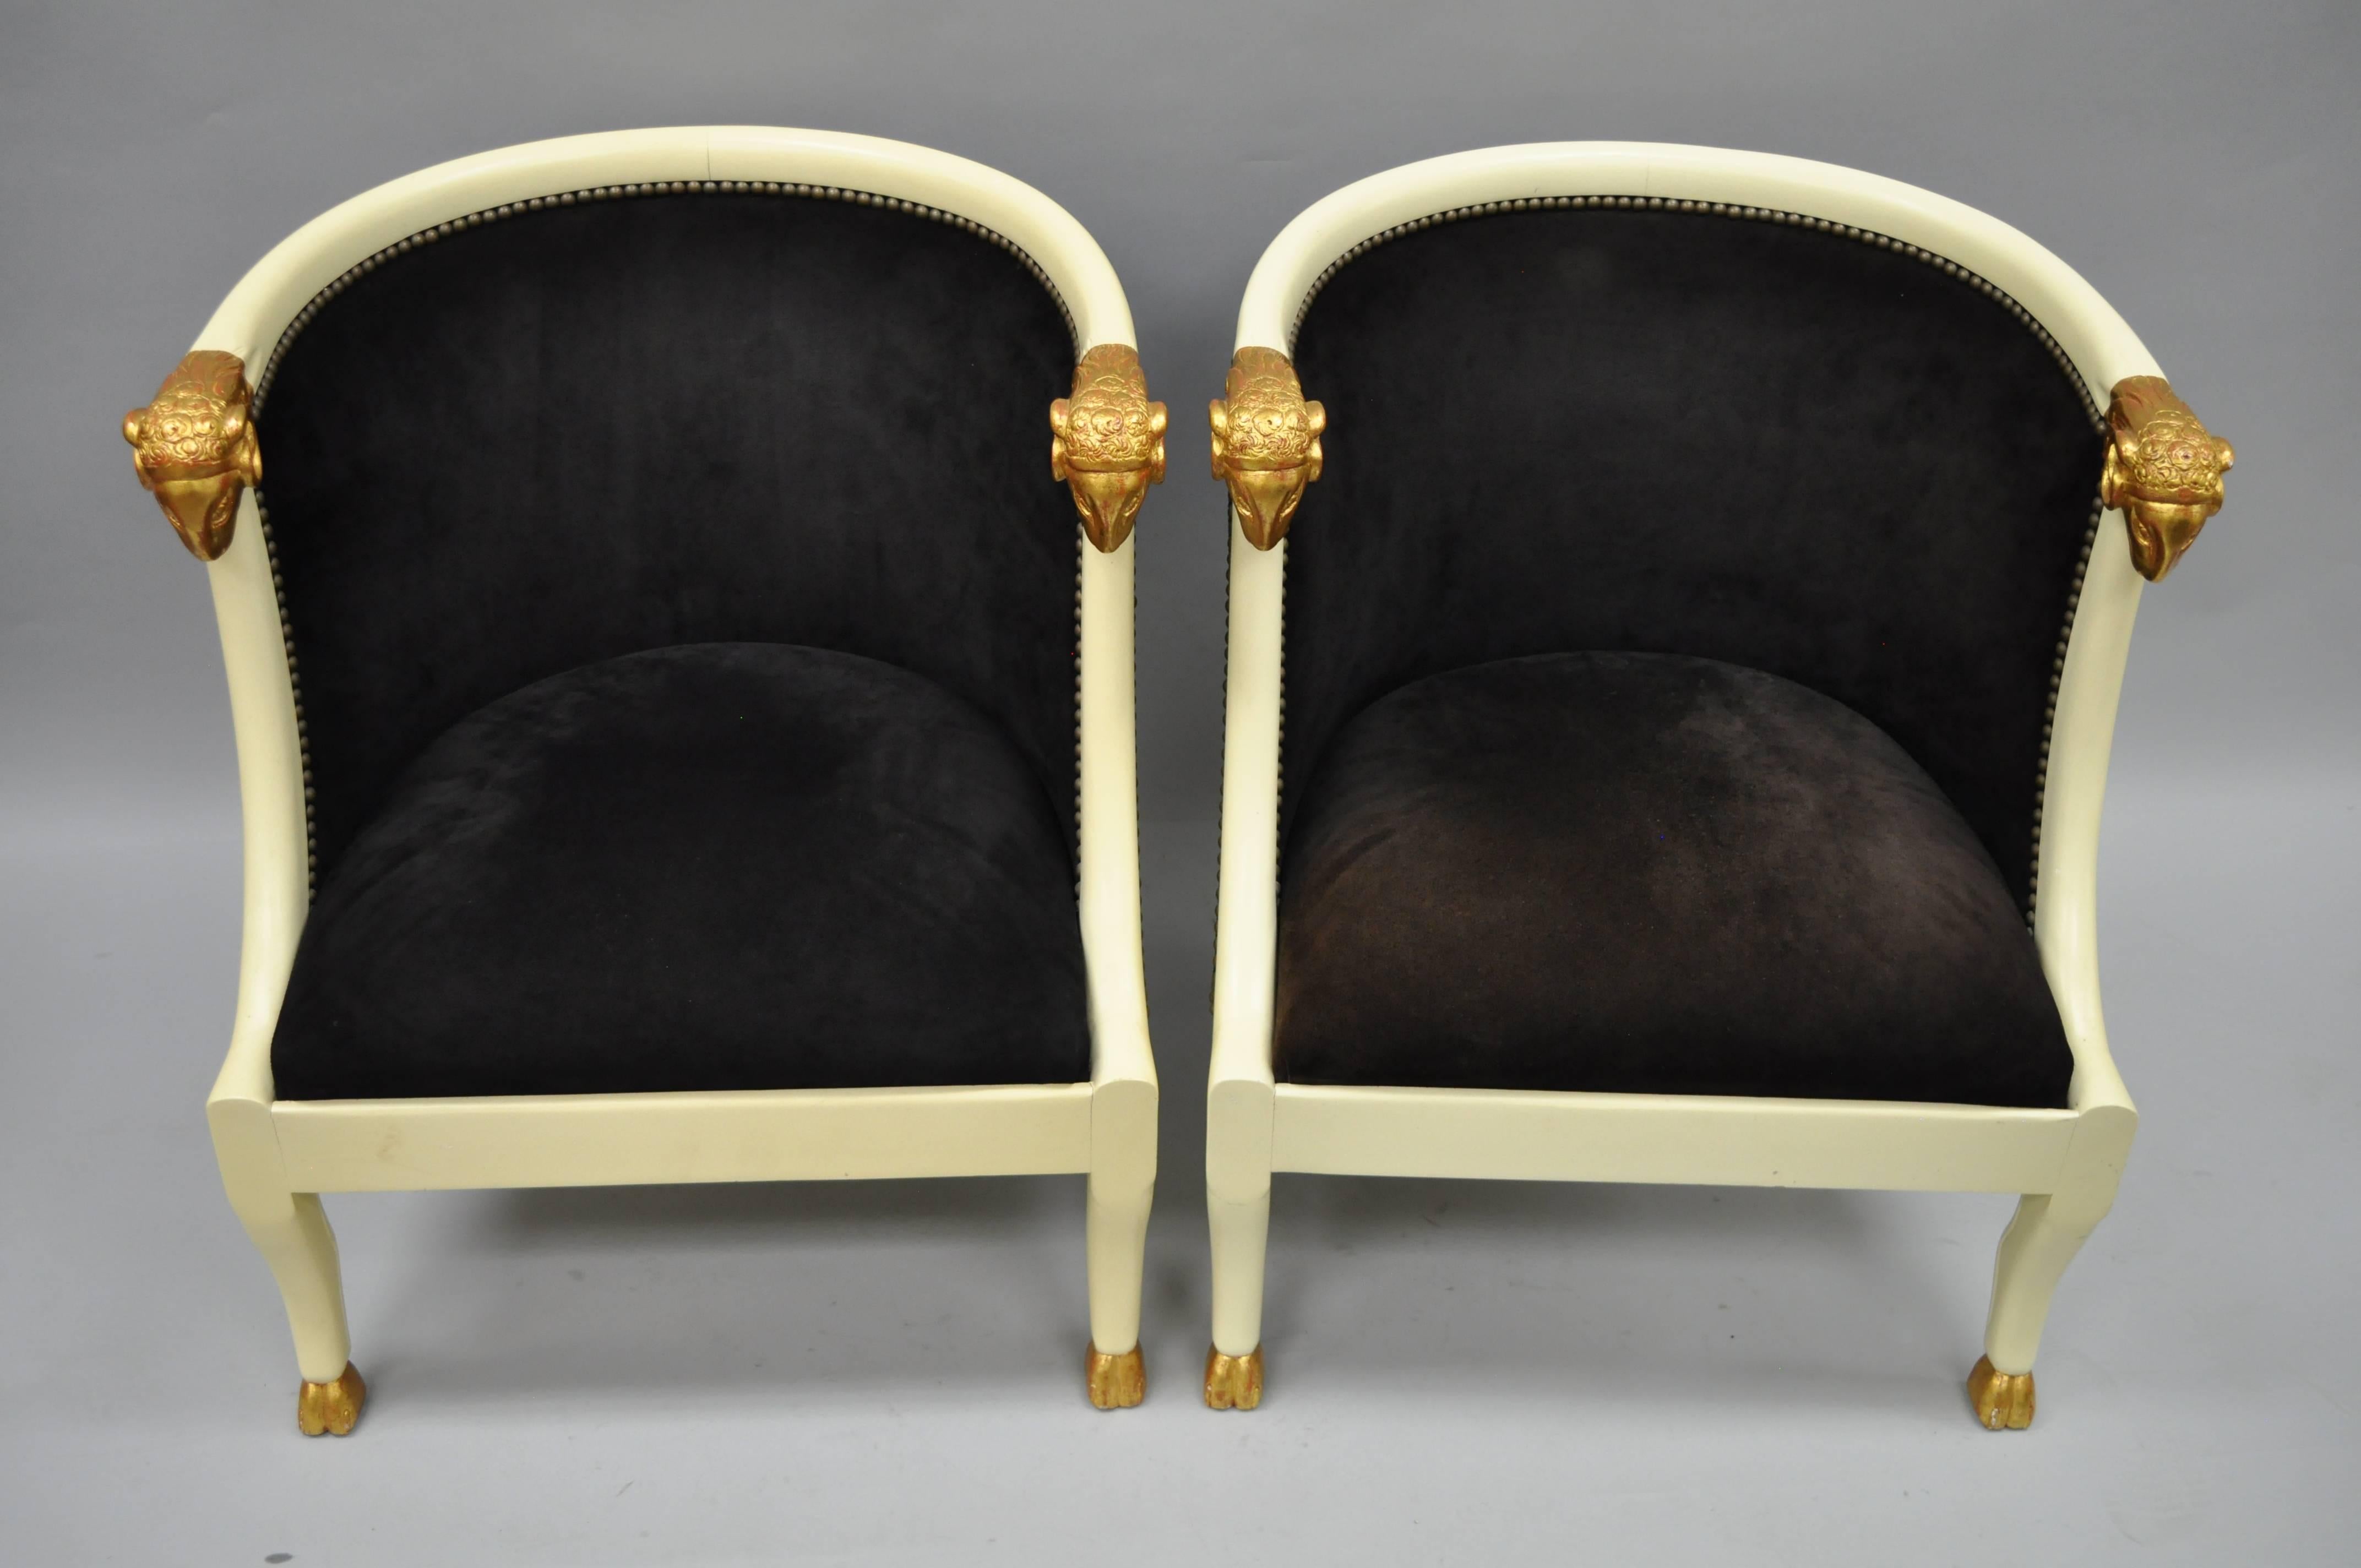 Pair of Ram's Head Regency Neoclassical Style Barrel Back Chairs with Hoof Feet For Sale 2